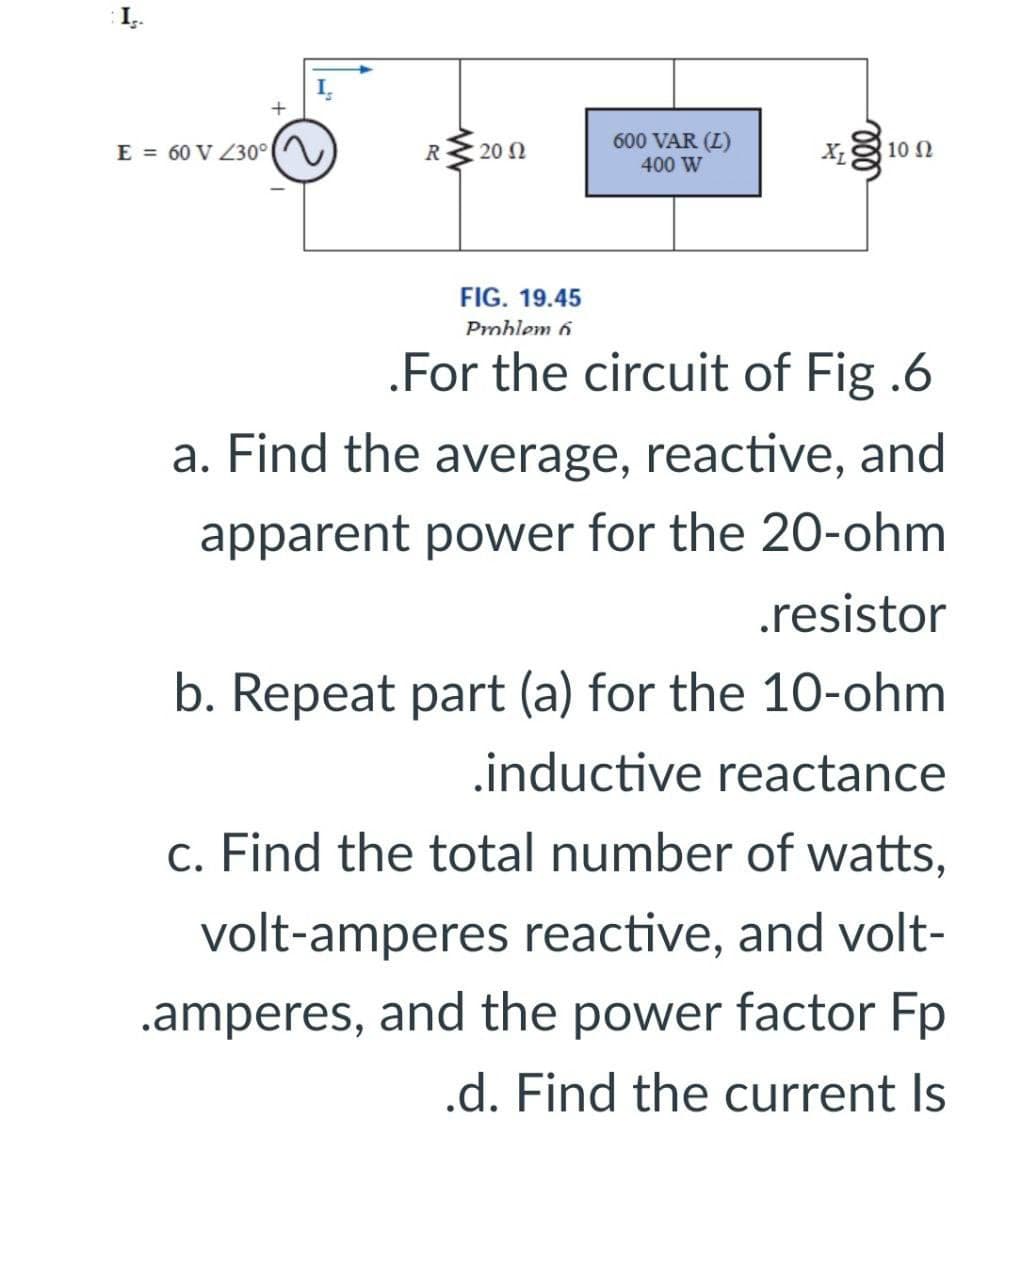 :I₂.
+
E = 60 V 230° (^~
R
20 Ω
600 VAR (L)
400 W
XL
ell
| 10 Ω
FIG. 19.45
Problem 6
.For the circuit of Fig.6
a. Find the average, reactive, and
apparent power for the 20-ohm
.resistor
b. Repeat part (a) for the 10-ohm
.inductive reactance
c. Find the total number of watts,
volt-amperes reactive, and volt-
.amperes, and the power factor Fp
.d. Find the current Is